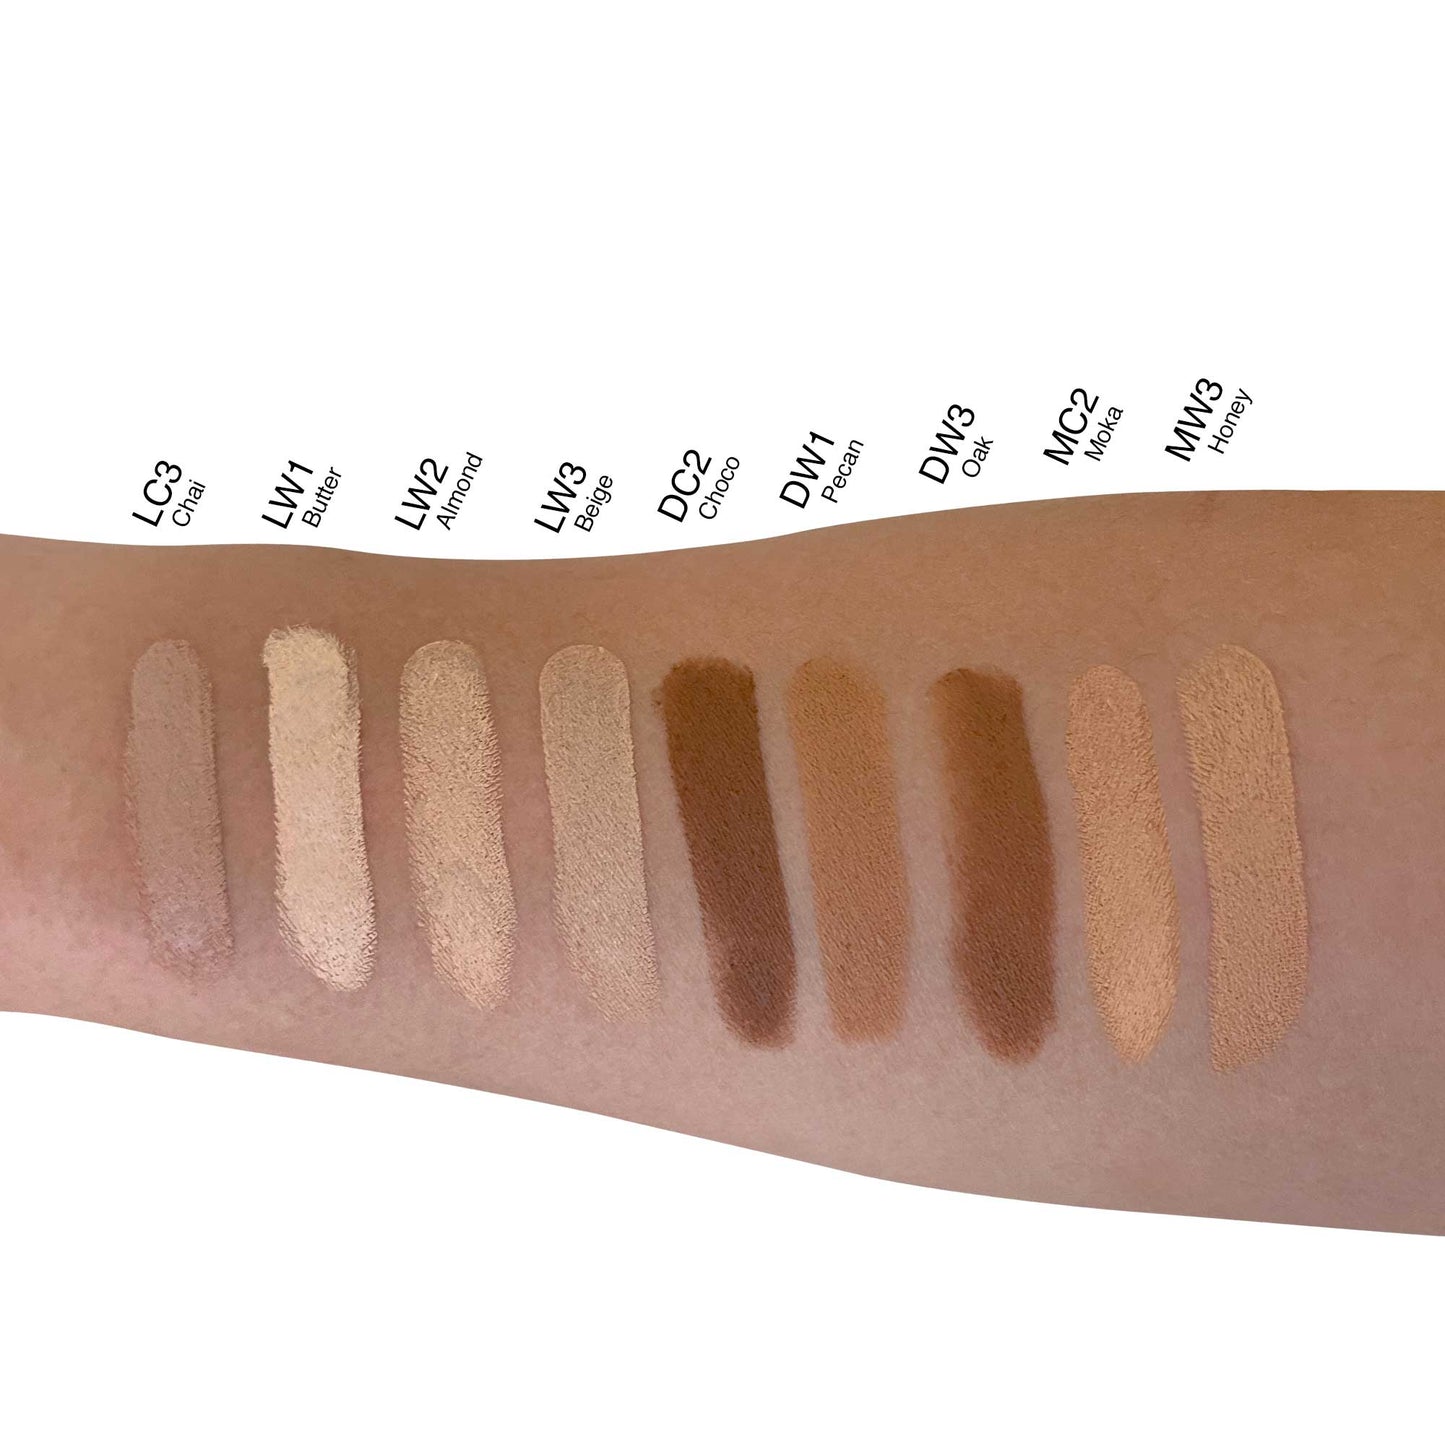 Different shades of conceal foundation shown on arm